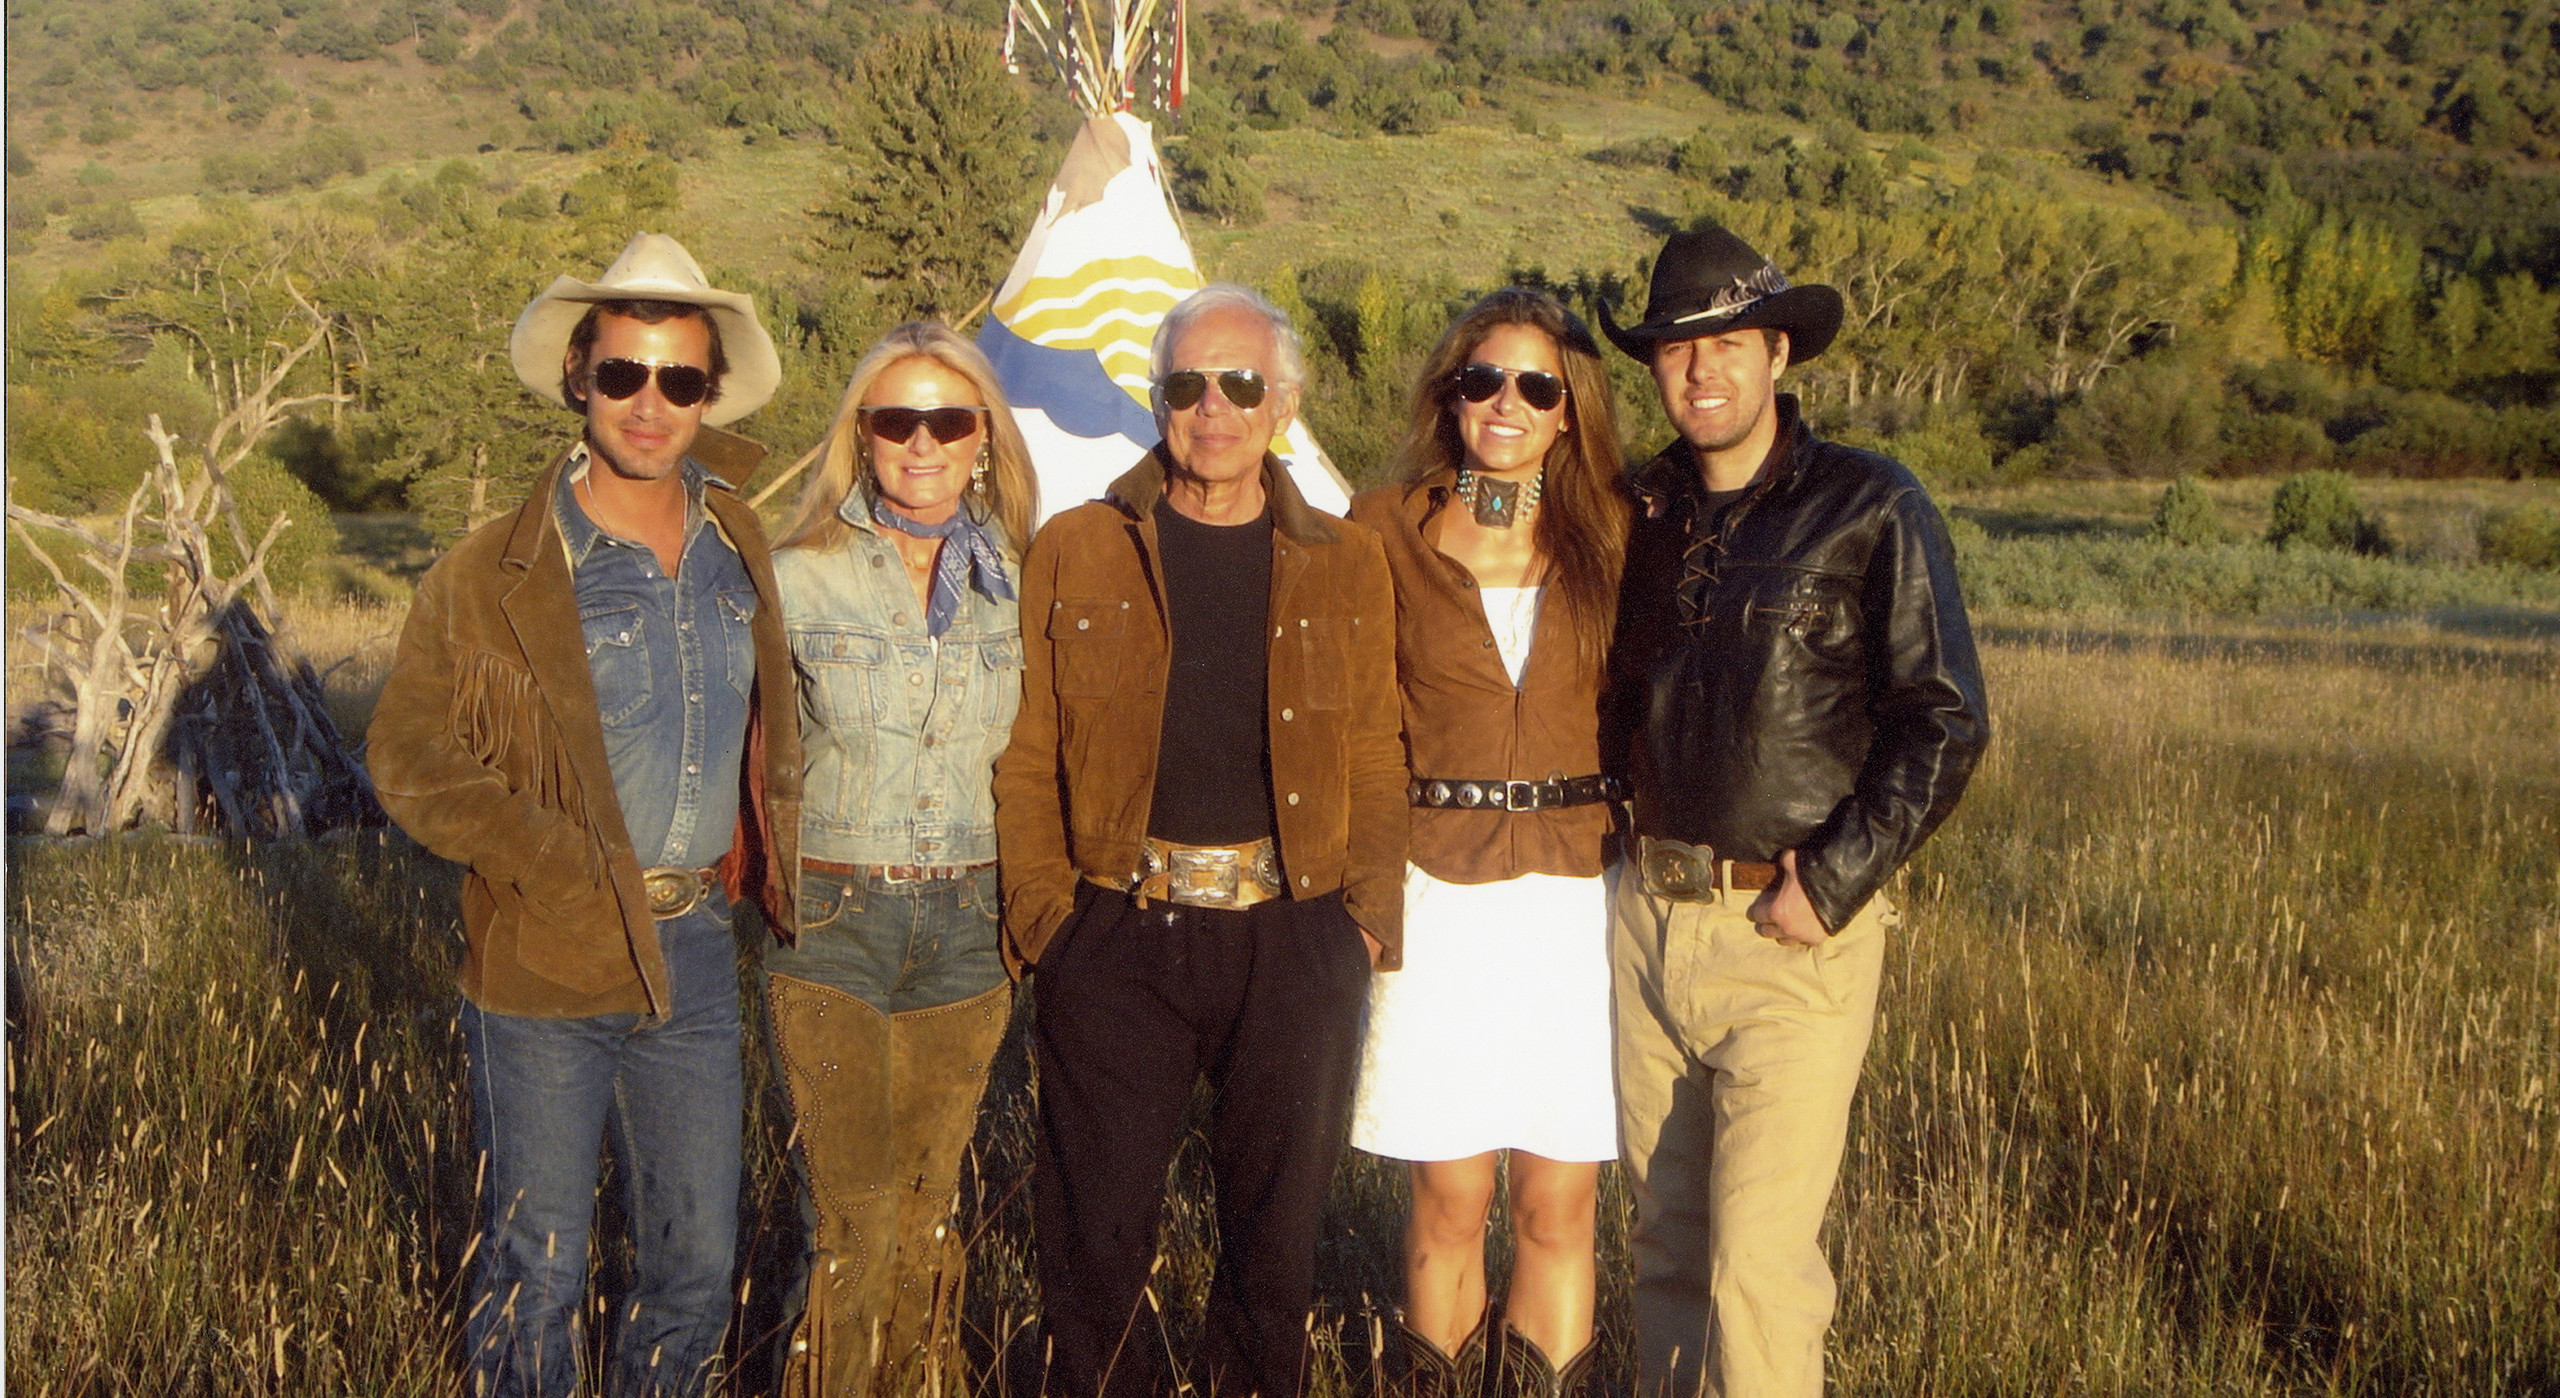 On the ranch with Ralph Lauren